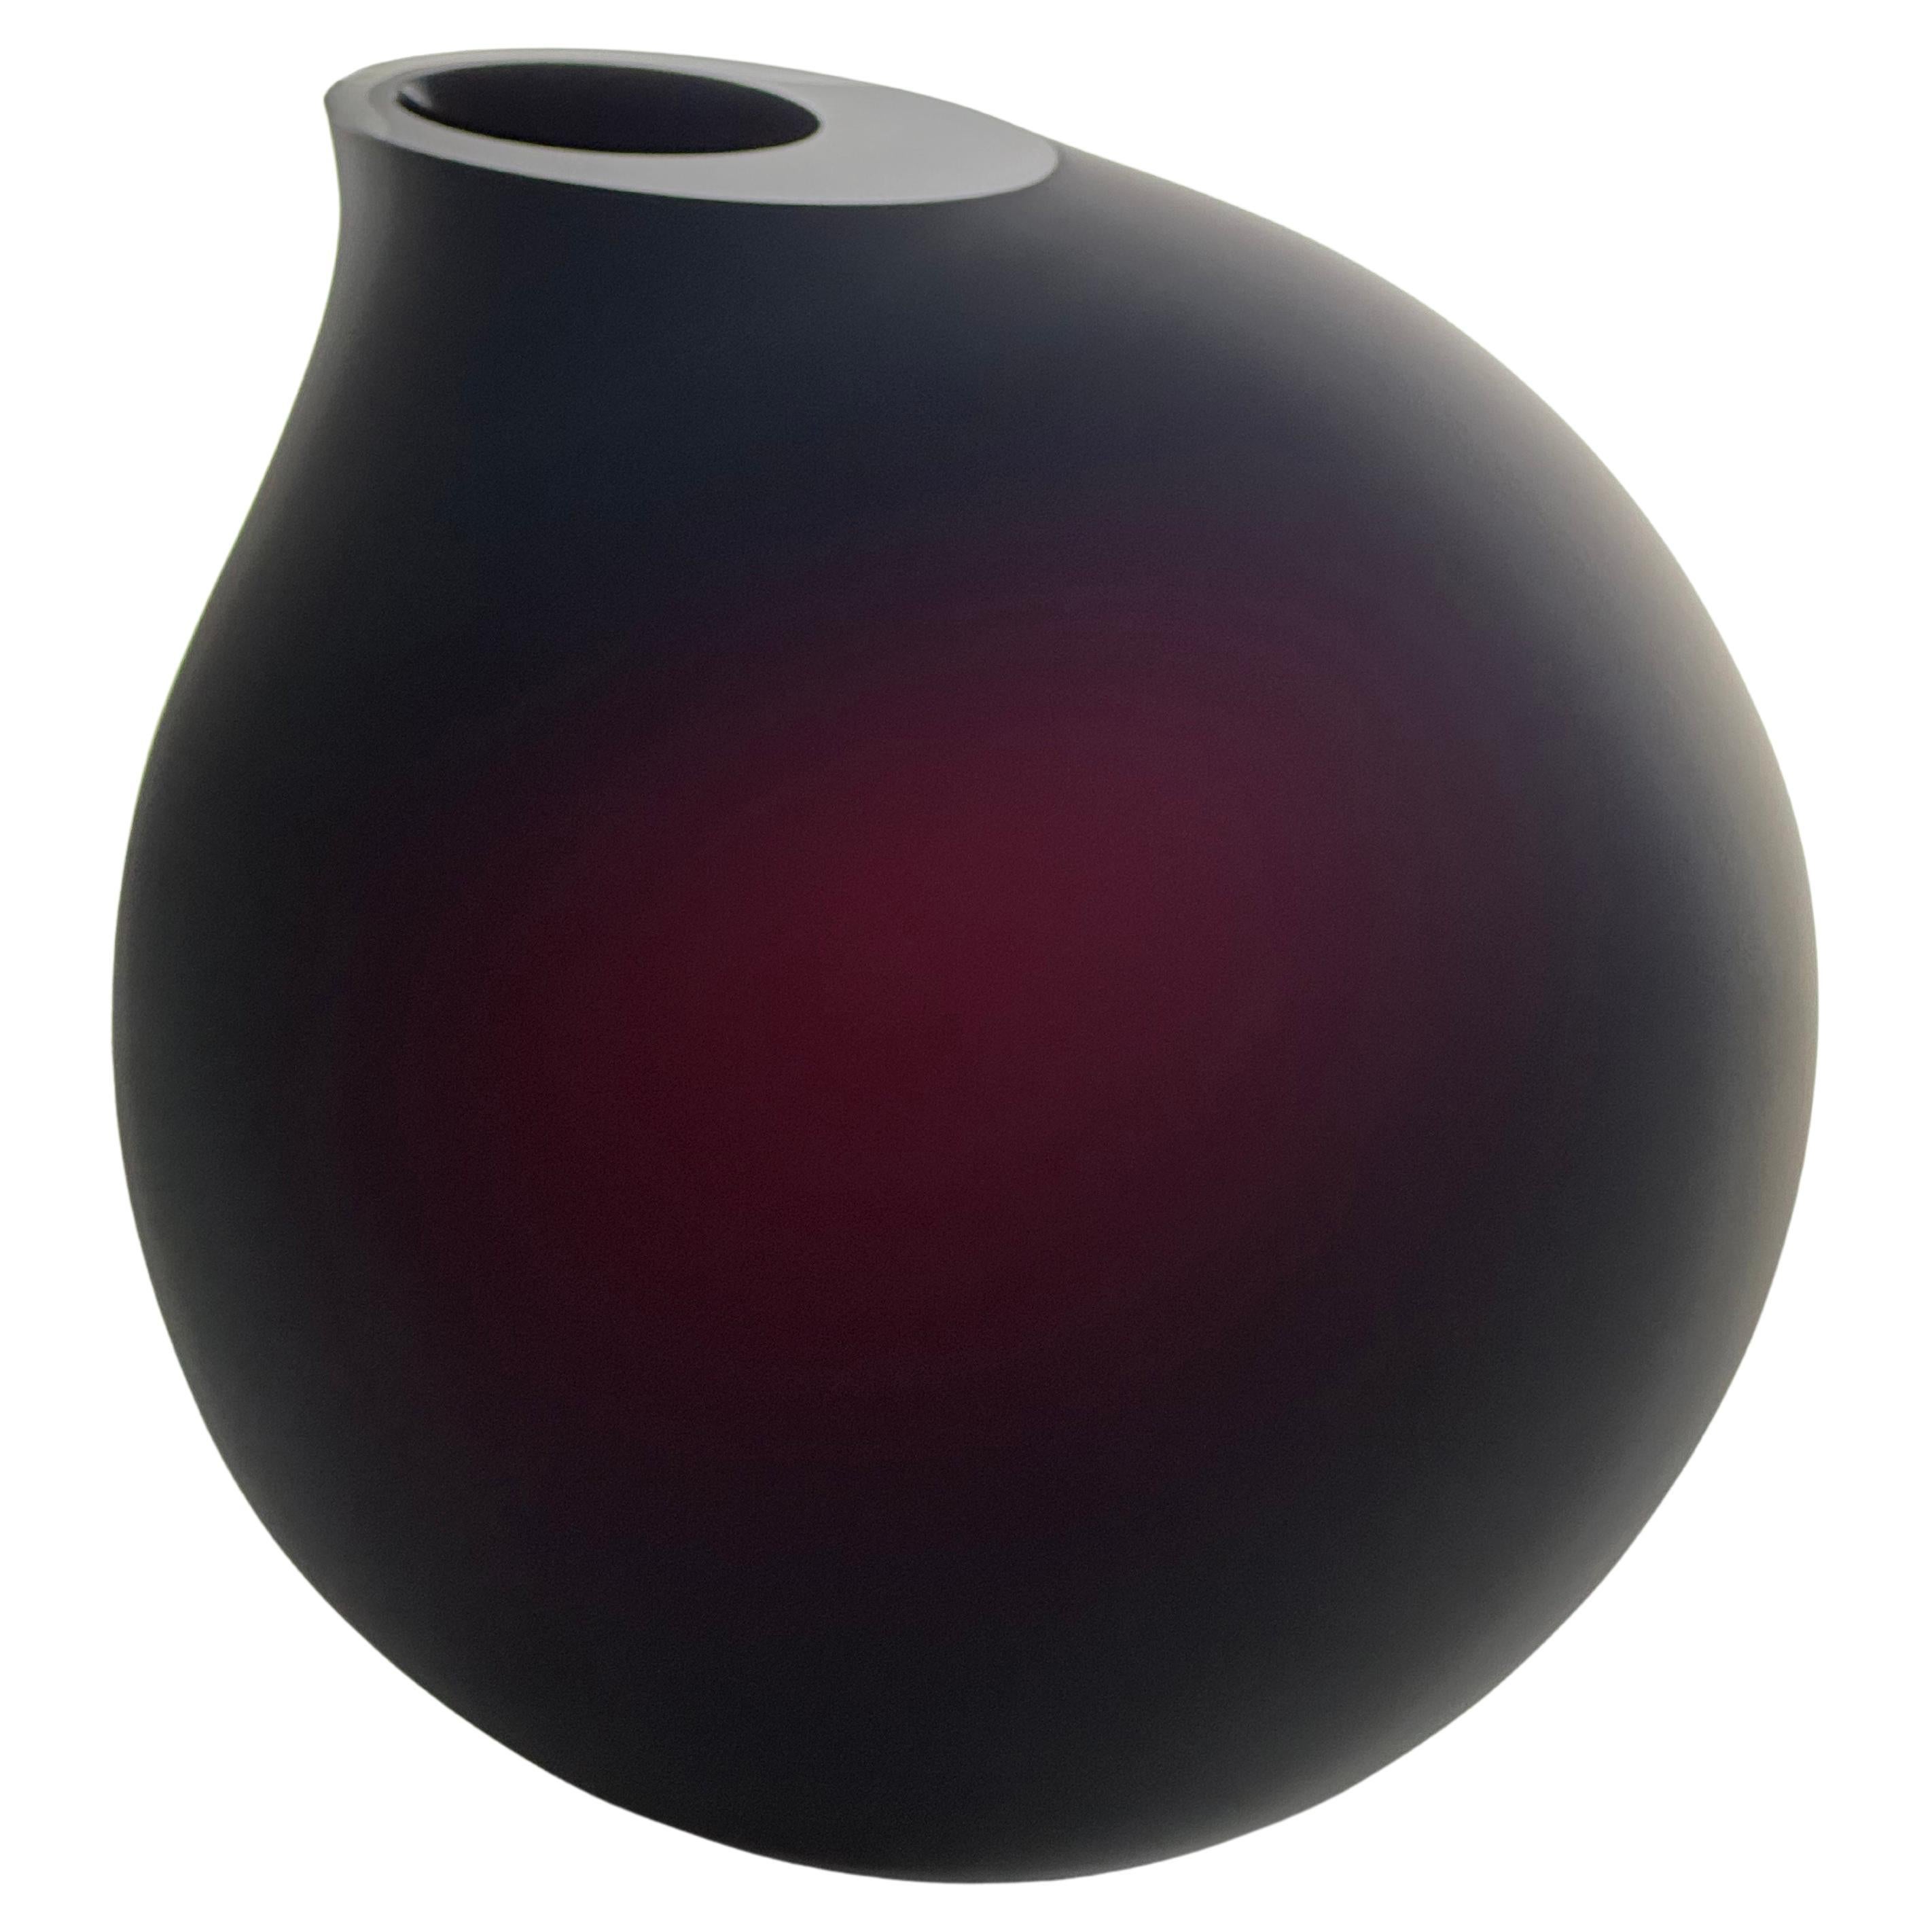 'Vaza" by Anna Torfs Sphere Vase in Burgundy Etched Belgian Art Glass - Signed